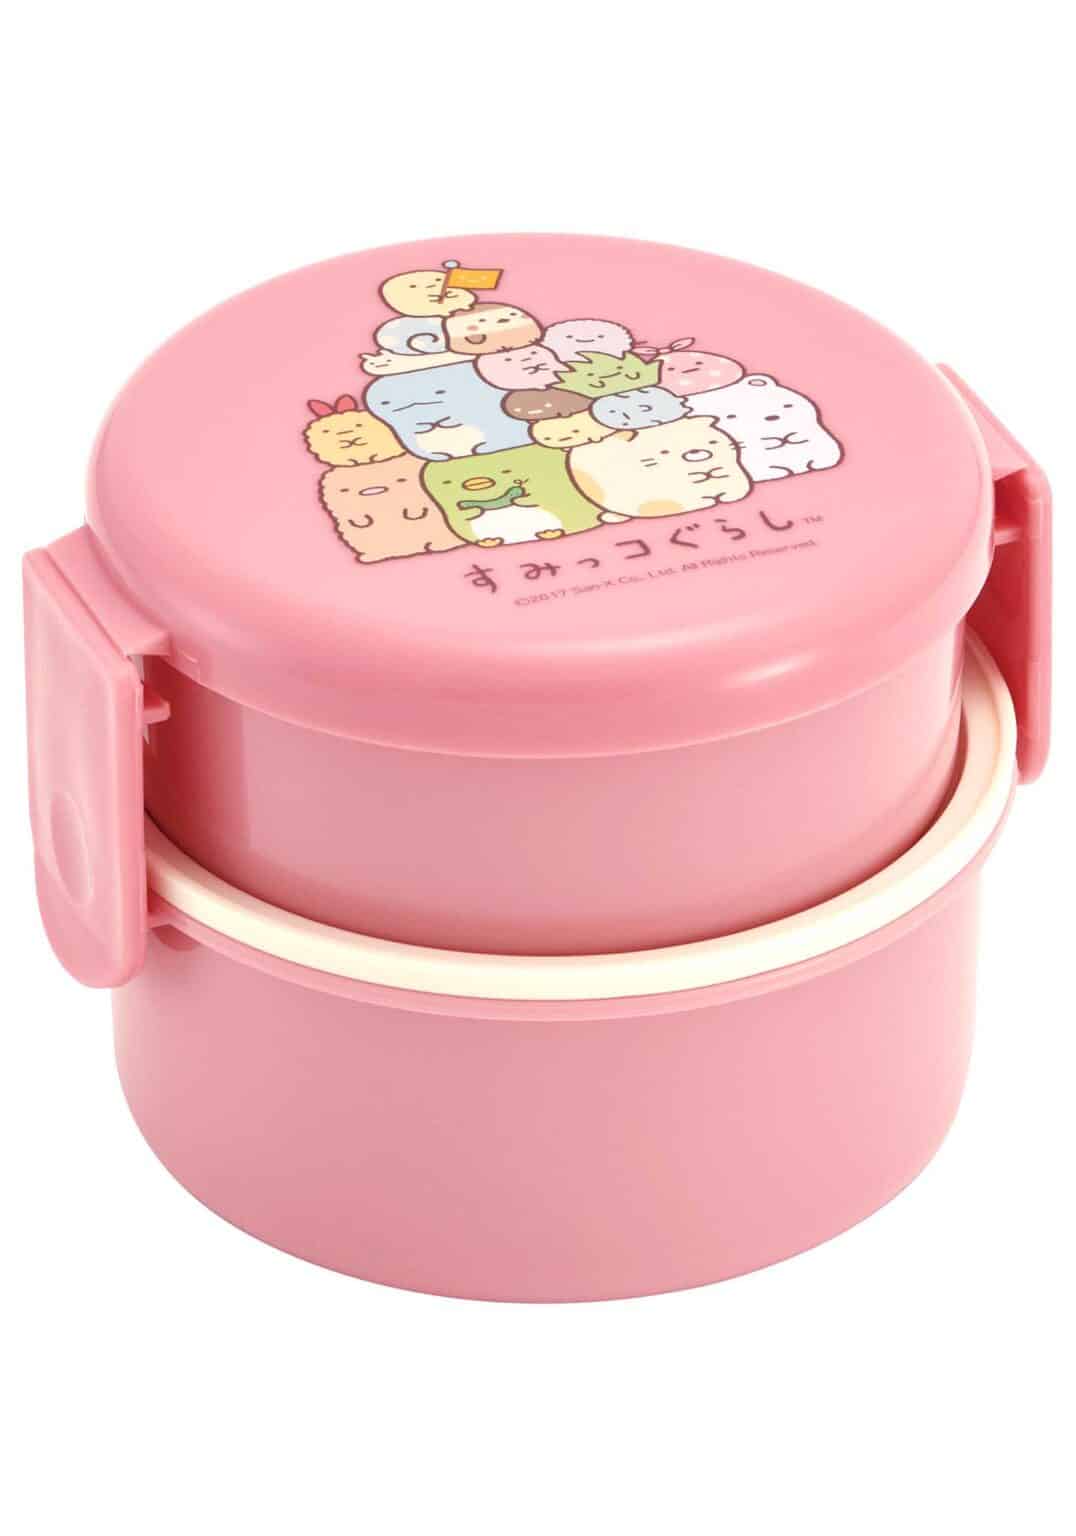 https://cdn.shopify.com/s/files/1/0528/2060/7157/products/clever-idiots-bento-sumikko-gurashi-round-bento-lunch-box-with-fork-38190562017494.jpg?v=1662659284&width=1076